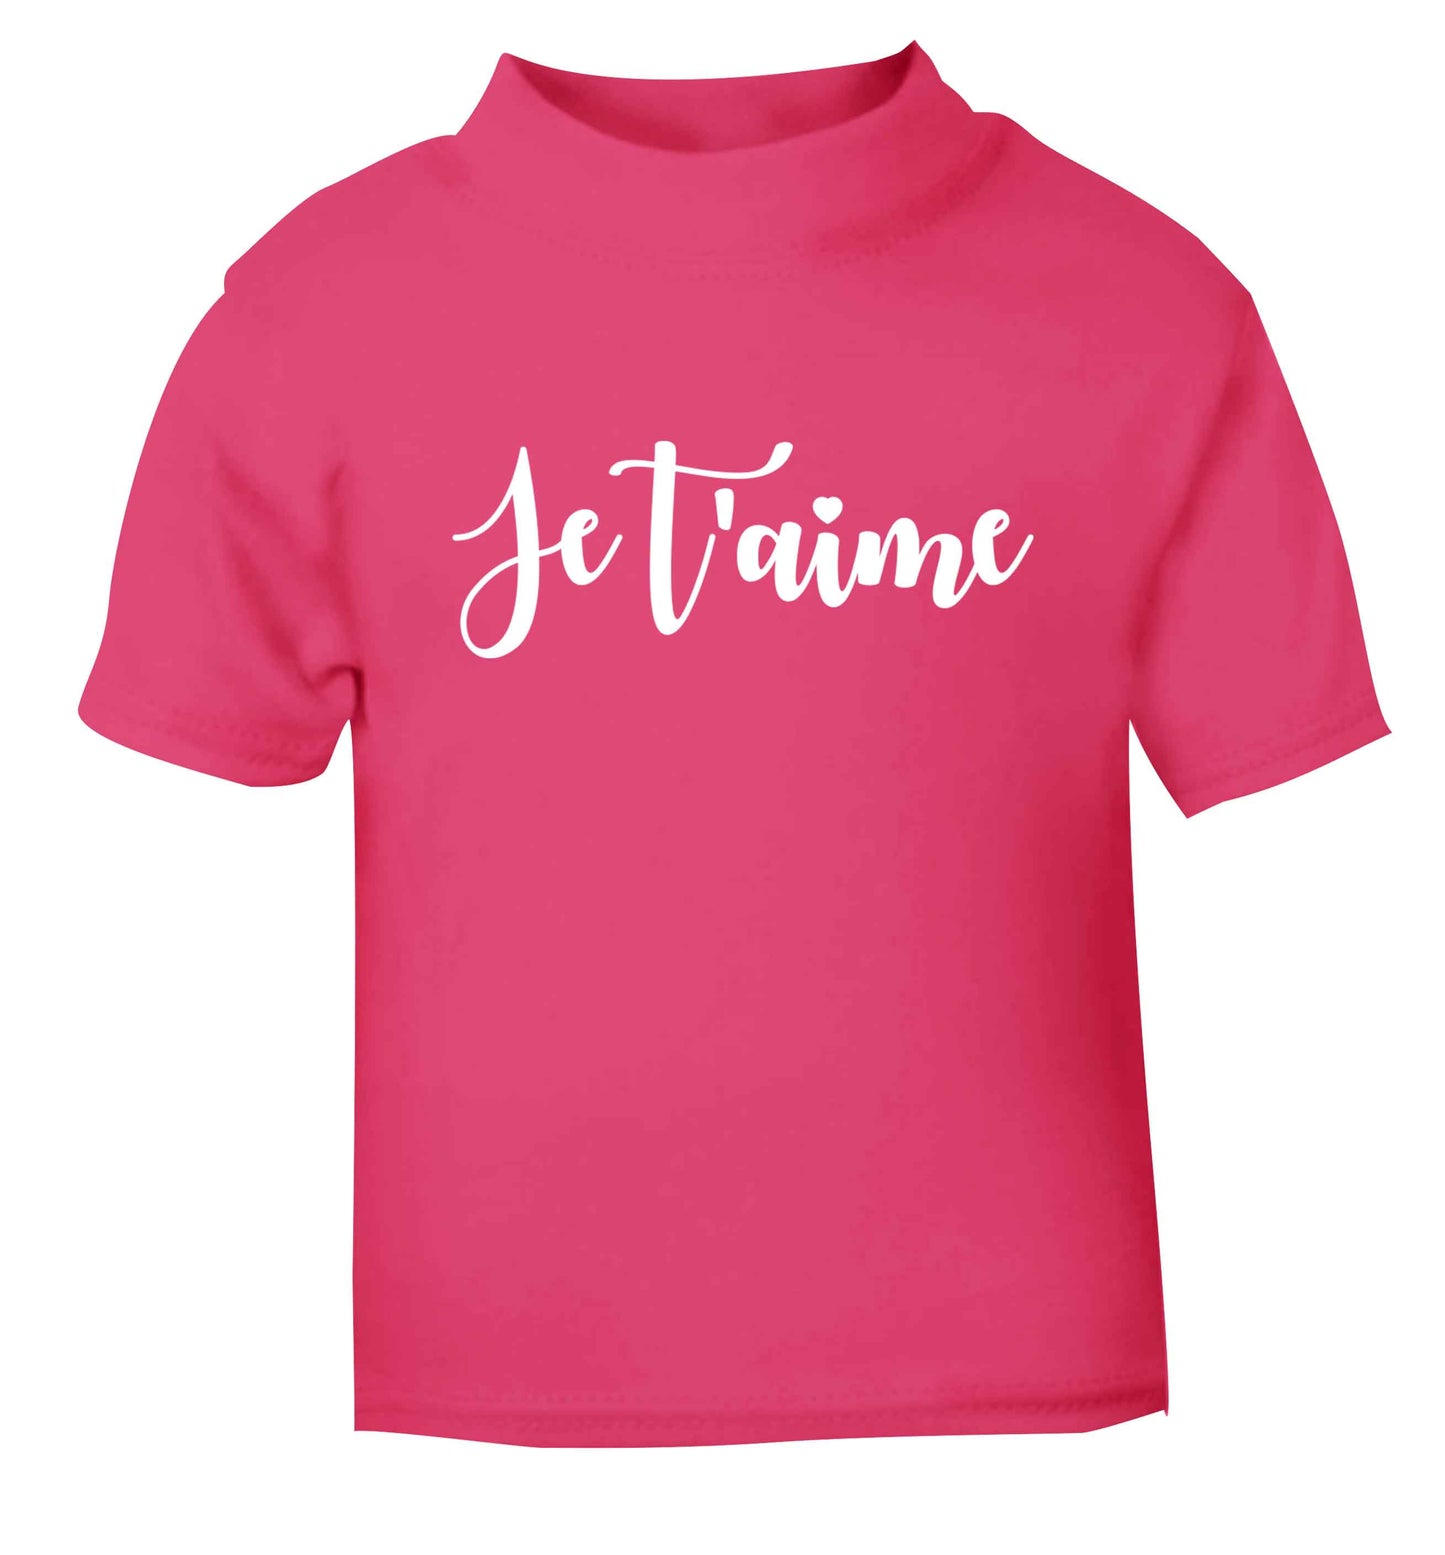 Je t'aime pink baby toddler Tshirt 2 Years